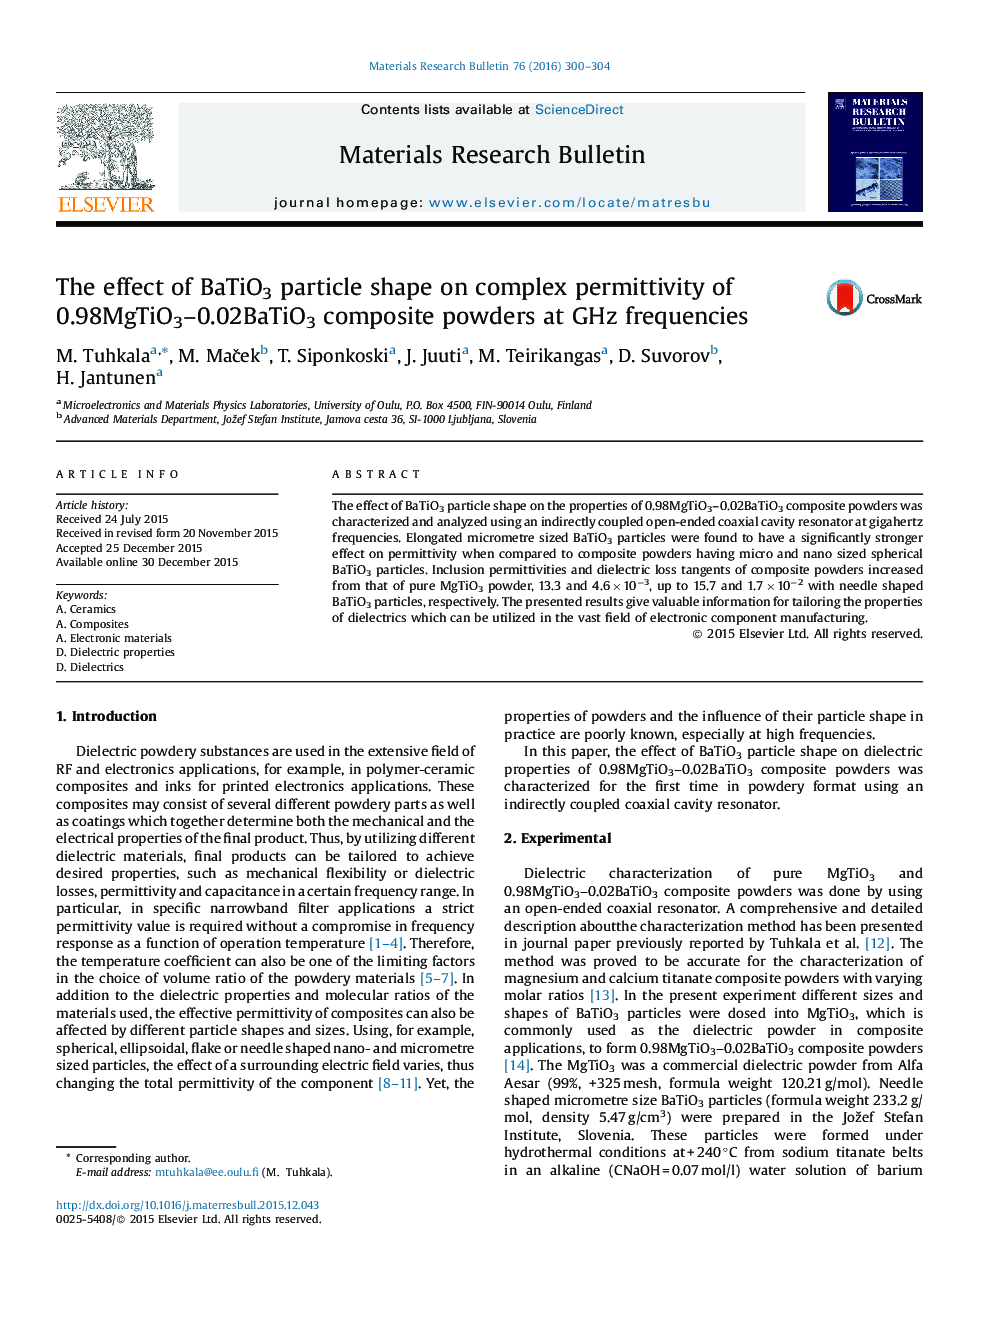 The effect of BaTiO3 particle shape on complex permittivity of 0.98MgTiO3–0.02BaTiO3 composite powders at GHz frequencies